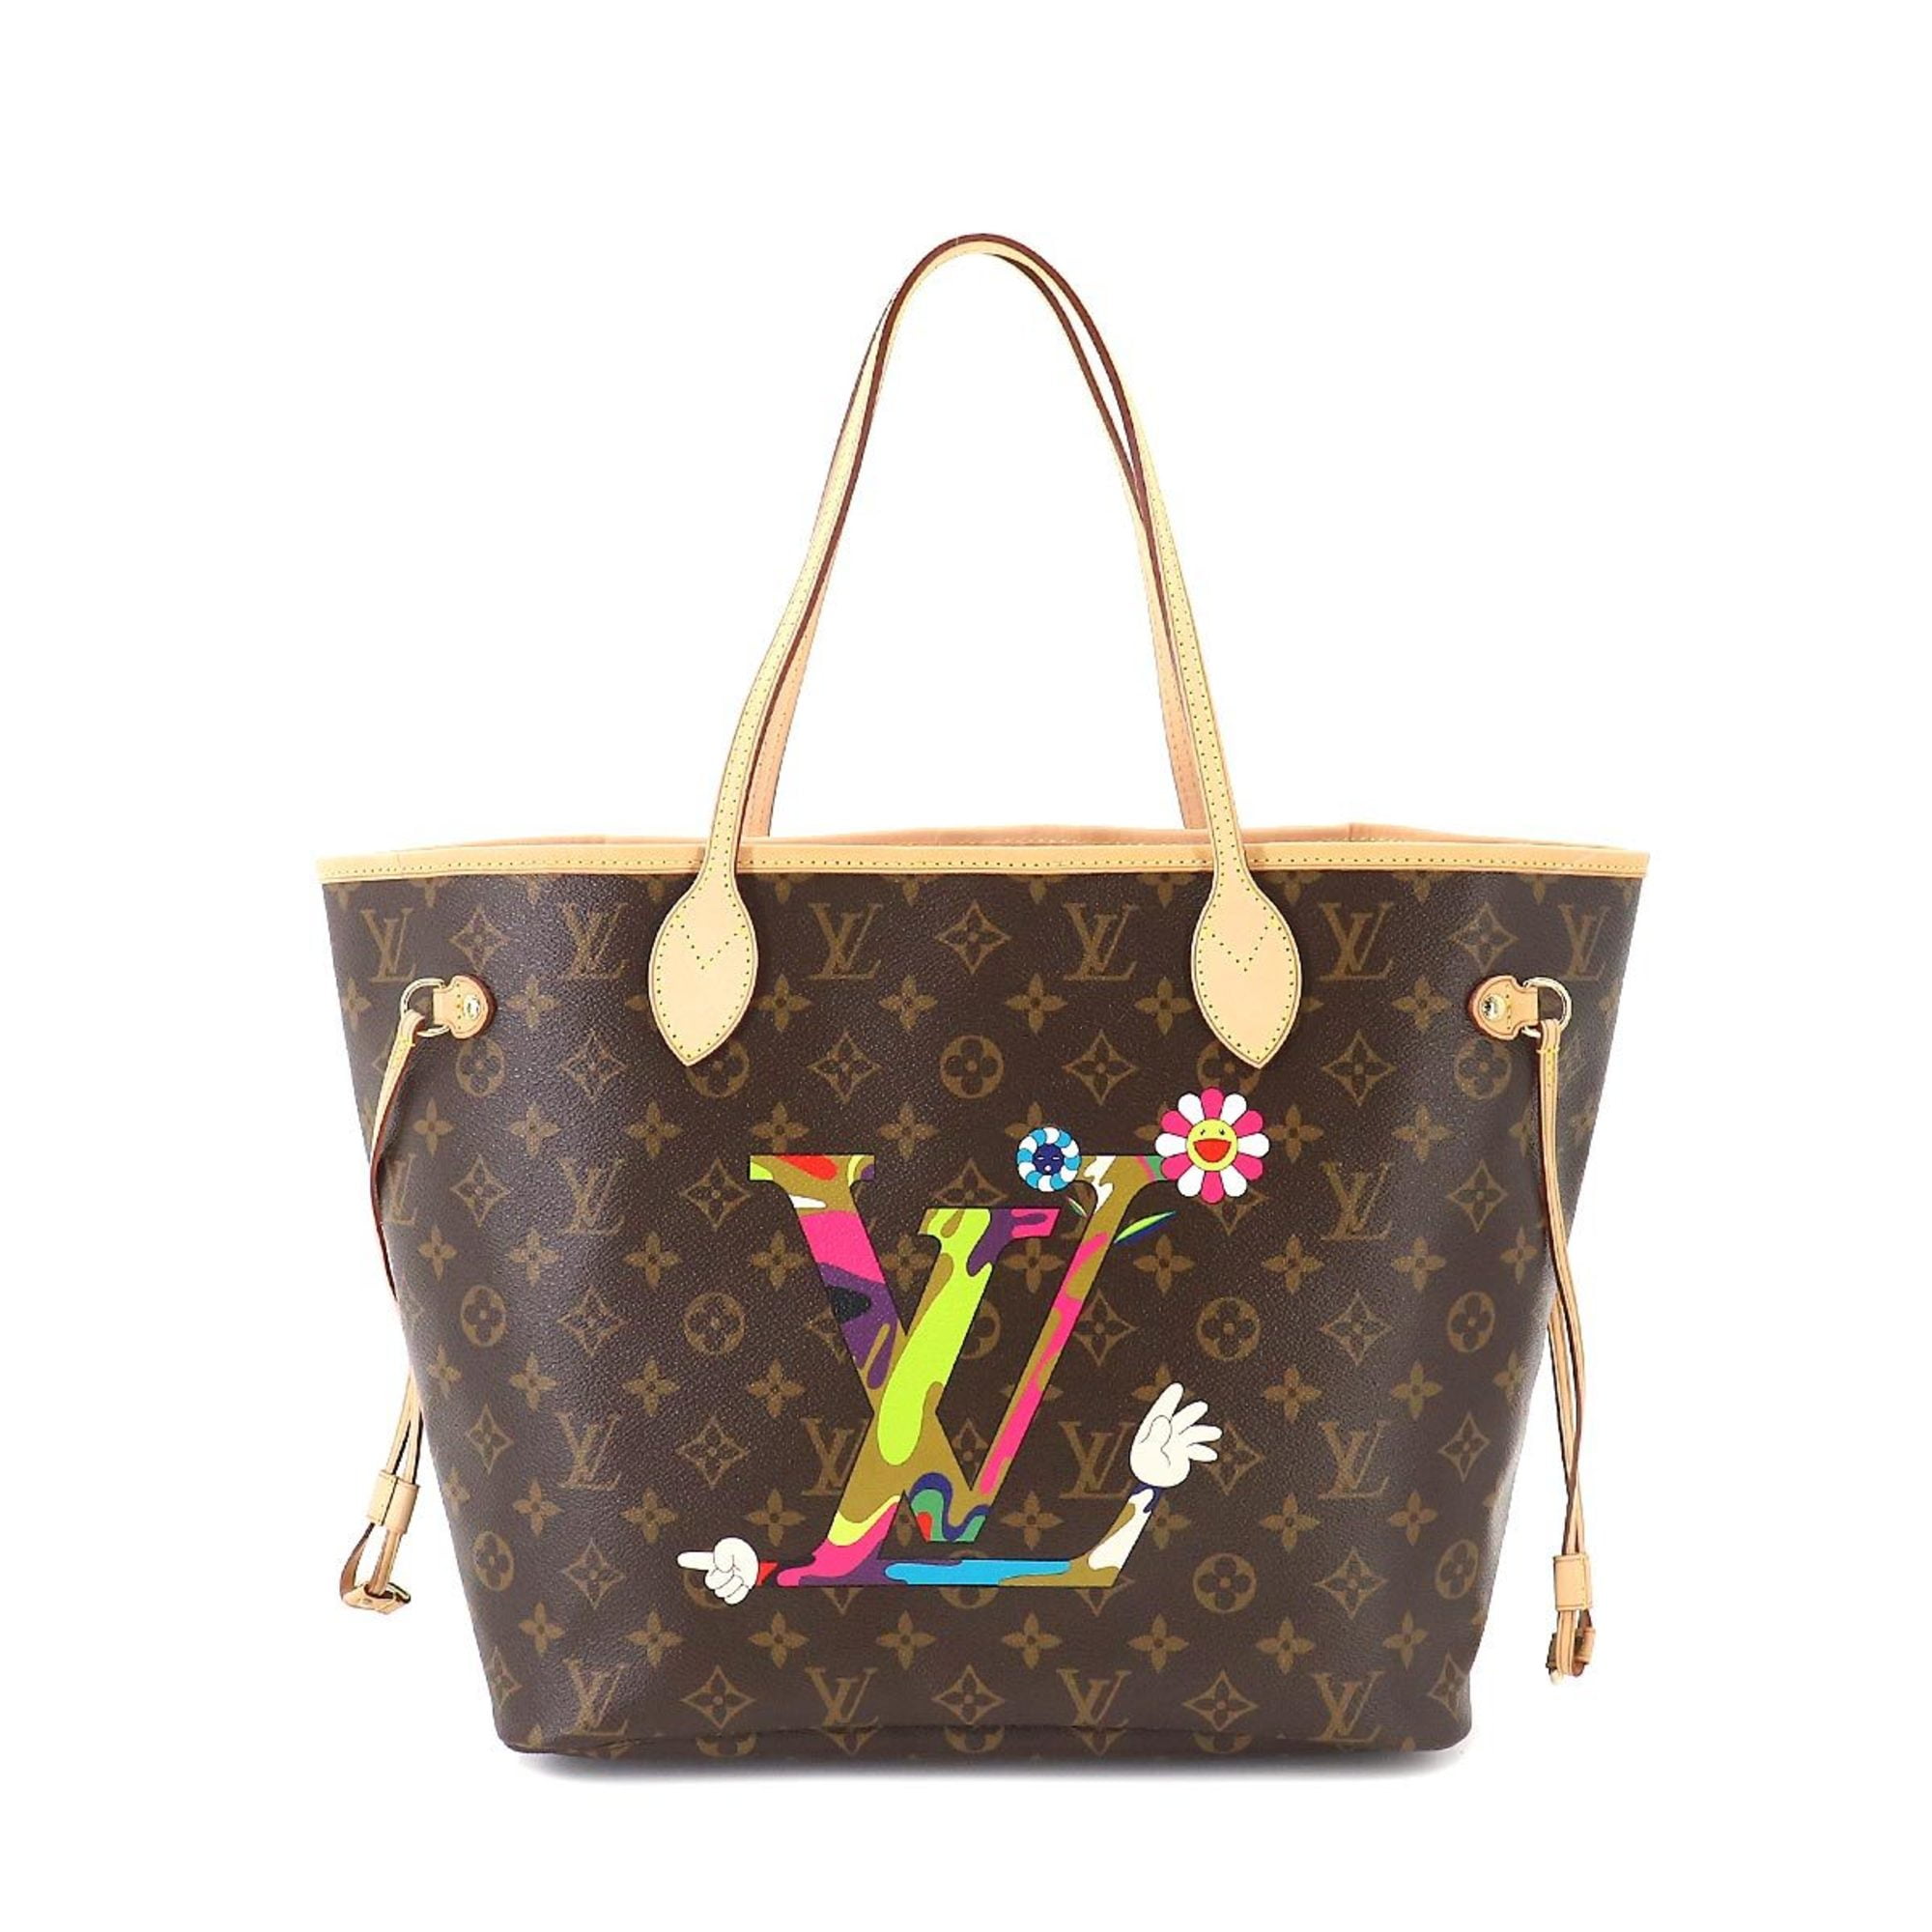 Louis Vuitton - Authenticated on My Side Handbag - Leather Multicolour for Women, Good Condition